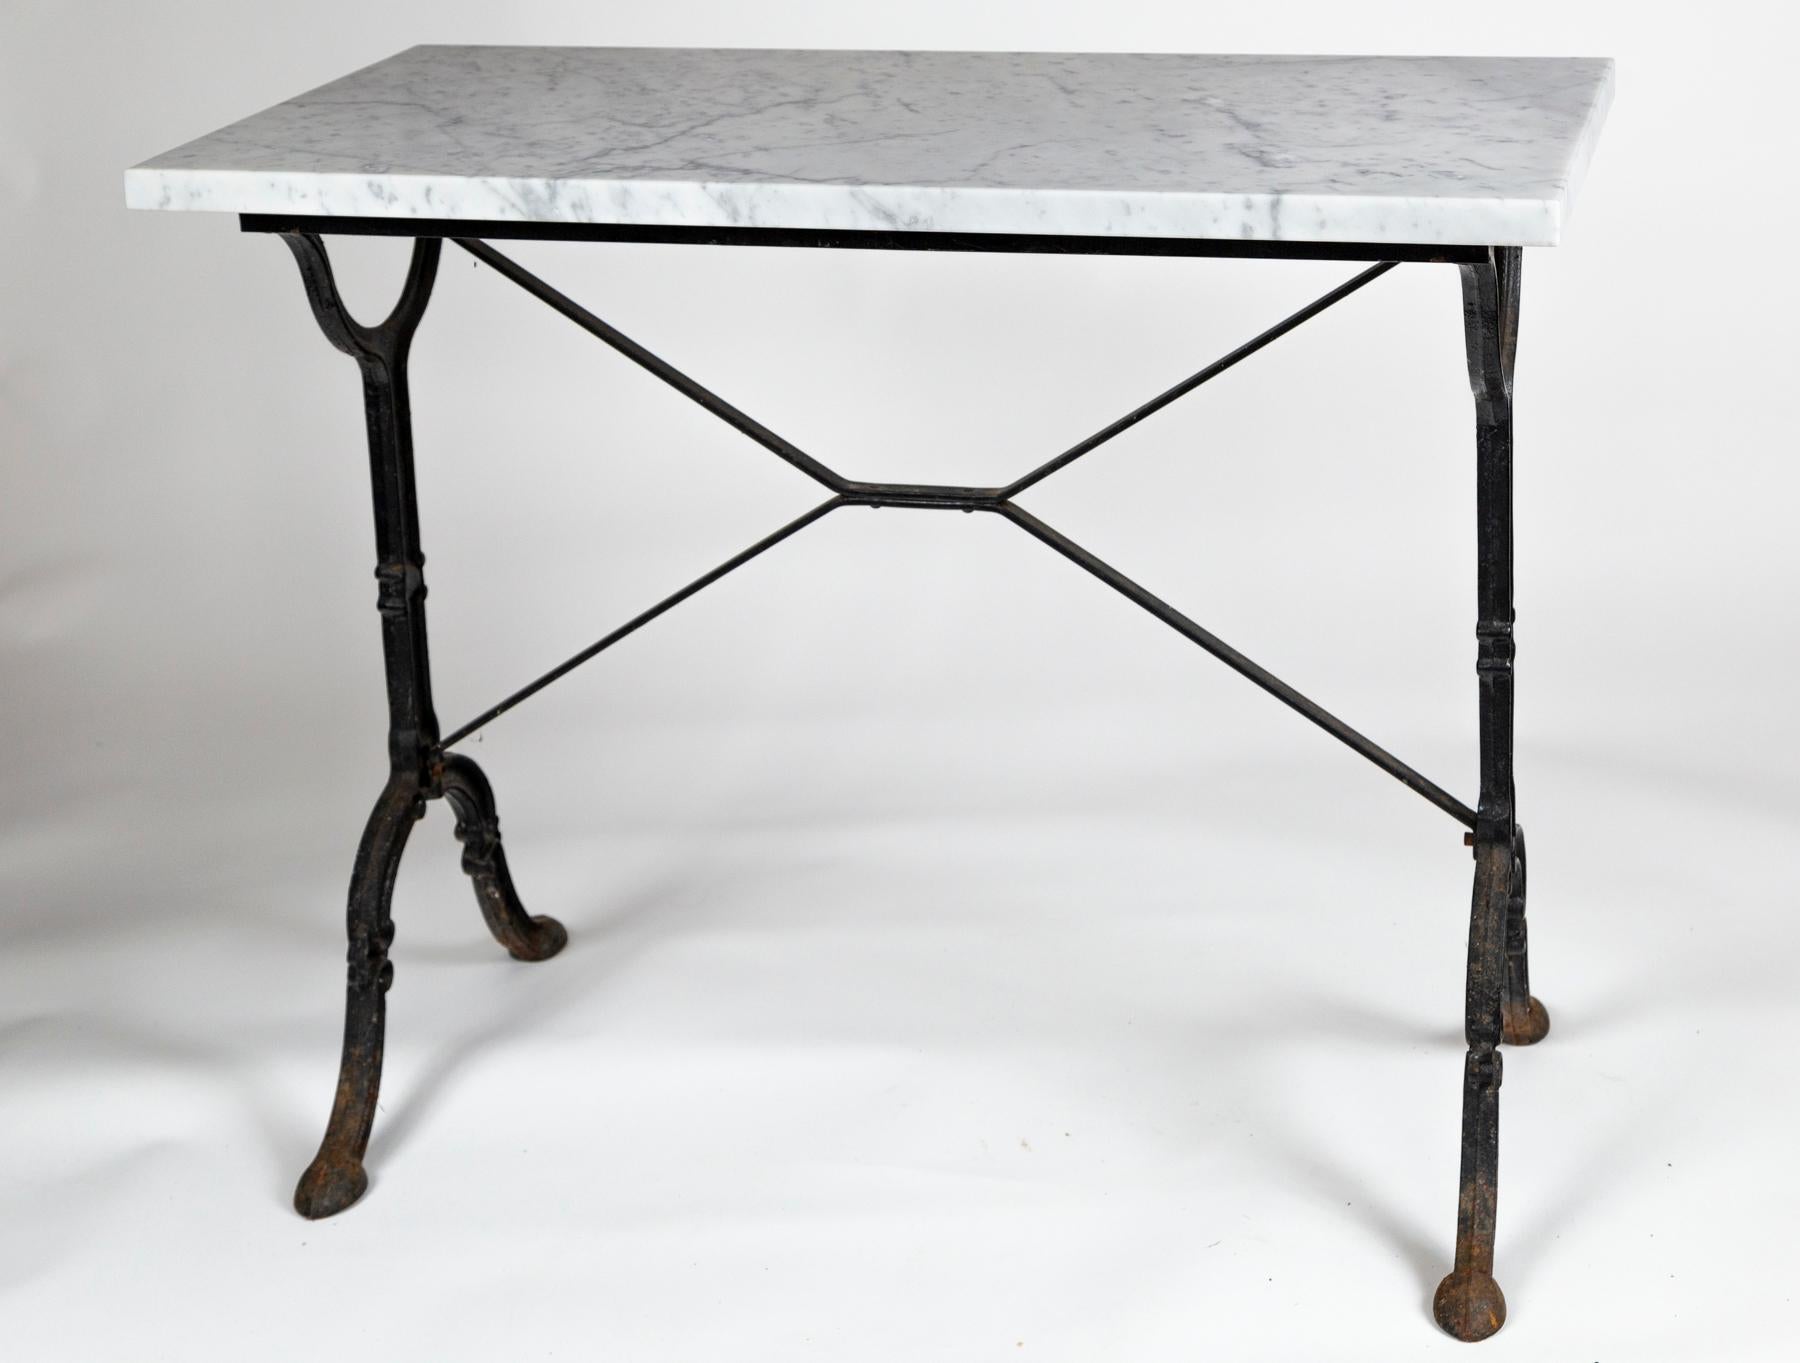 Antique French Marble Top Bistro Table, circa 1920. Finely detailed wrought iron base. Newer marble.